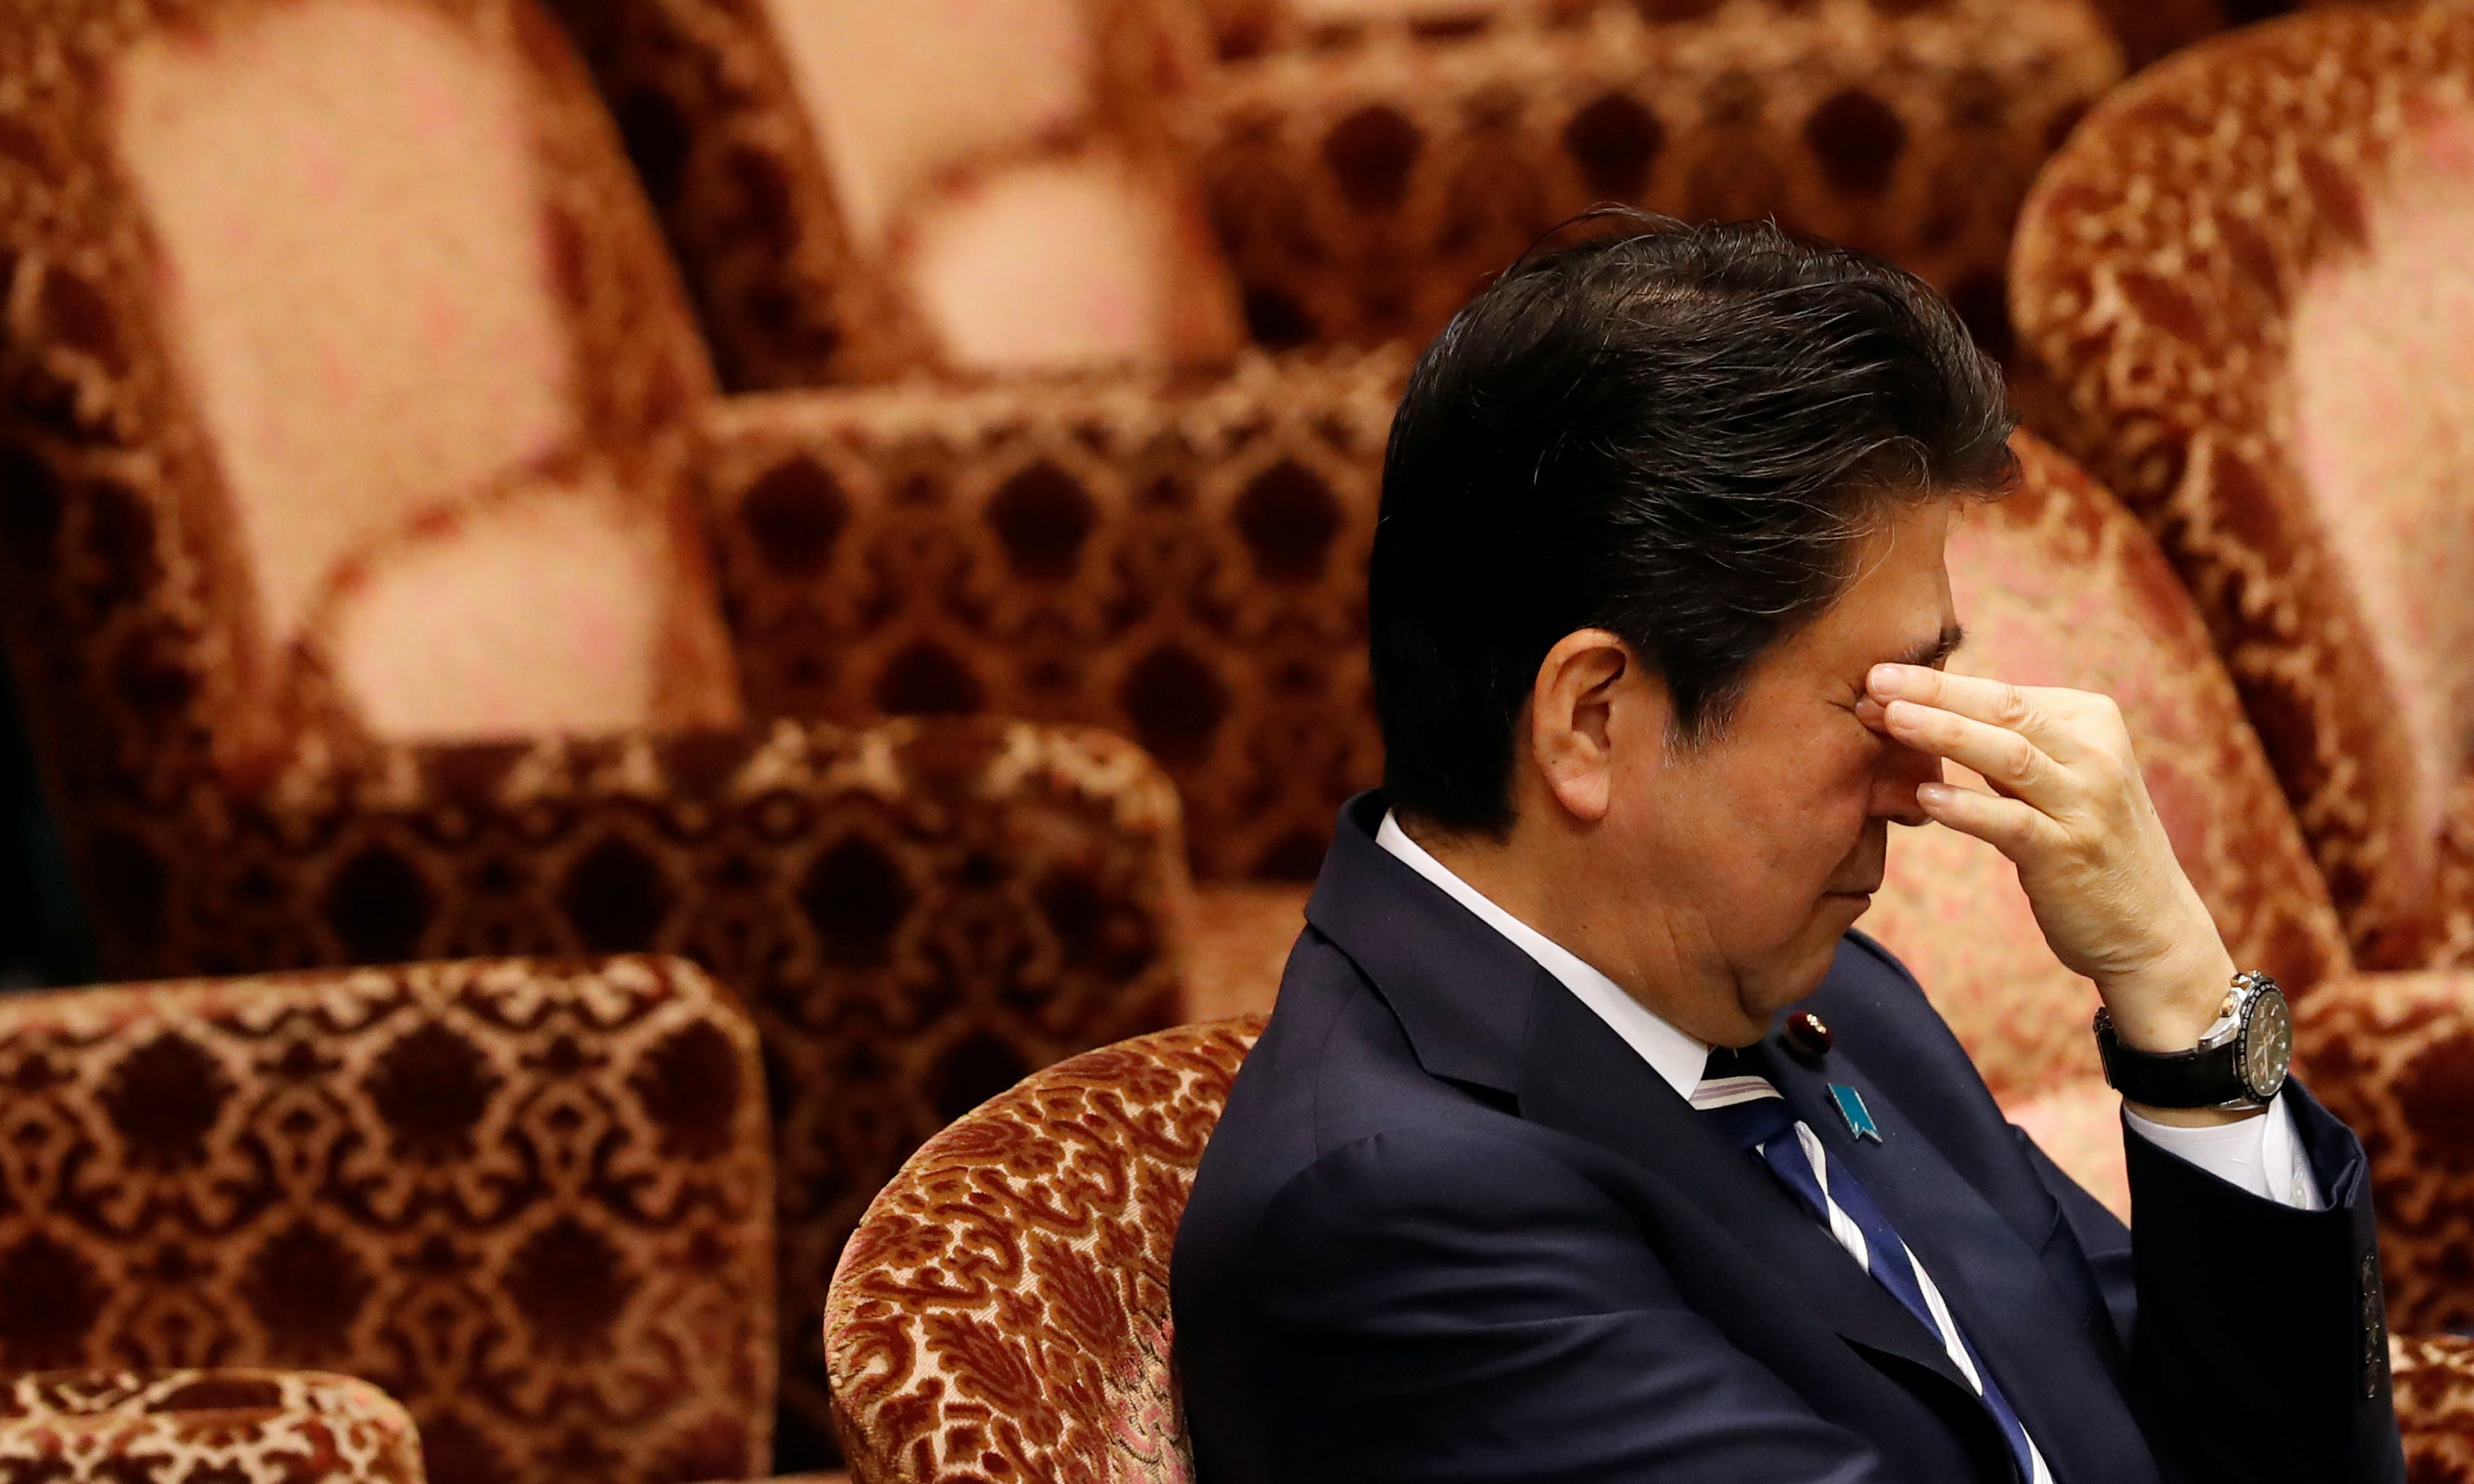 OPINION: Japan's Abe Rethinking North Korea After Trump's Policy Swerve